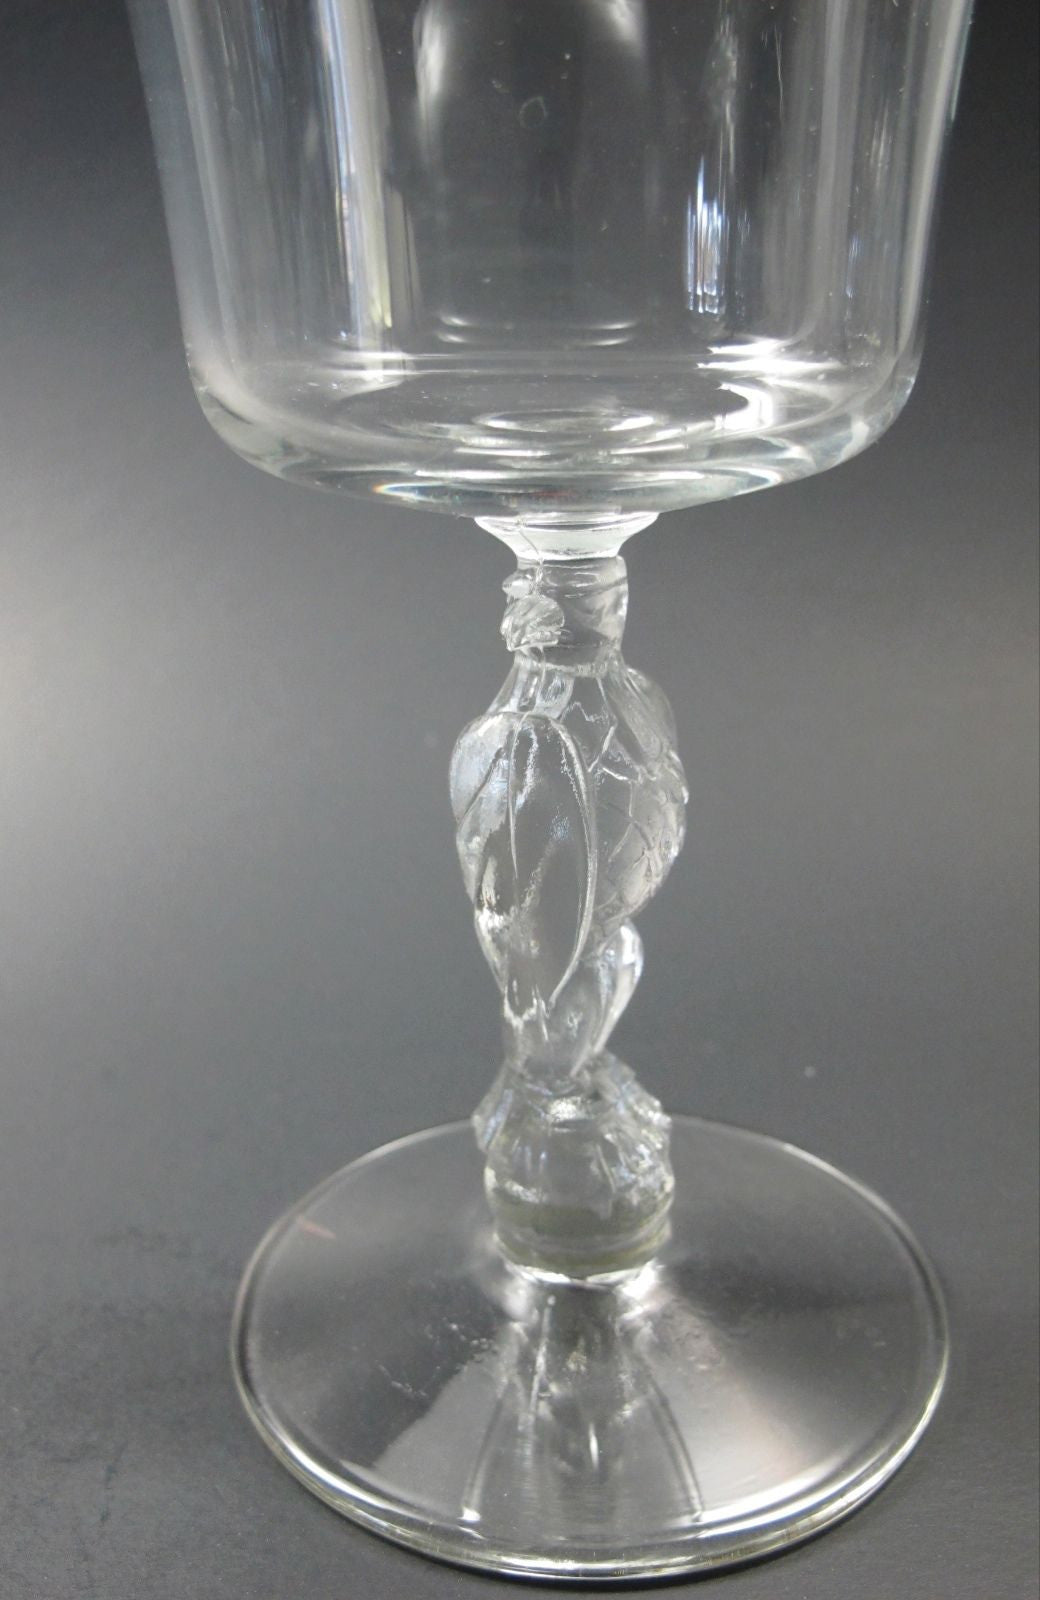 Eagle stem goblet Crystal  Made in USA - O'Rourke crystal awards & gifts abp cut glass